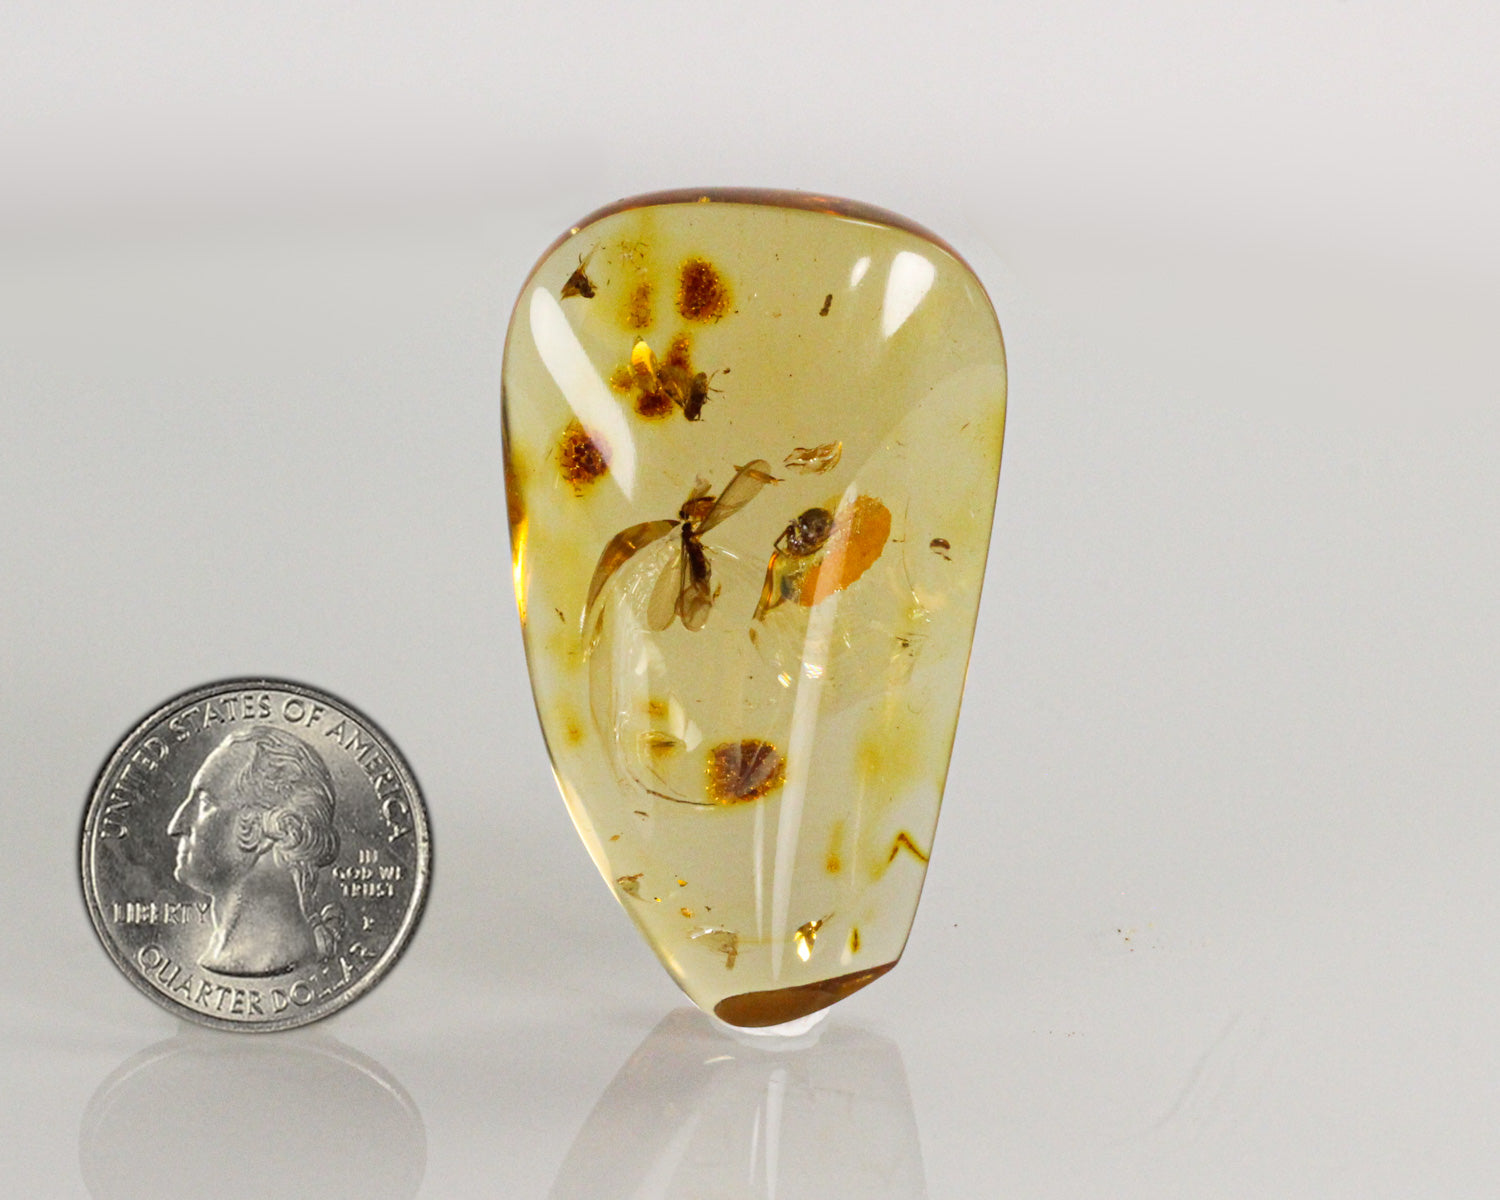 Amber (with insects)